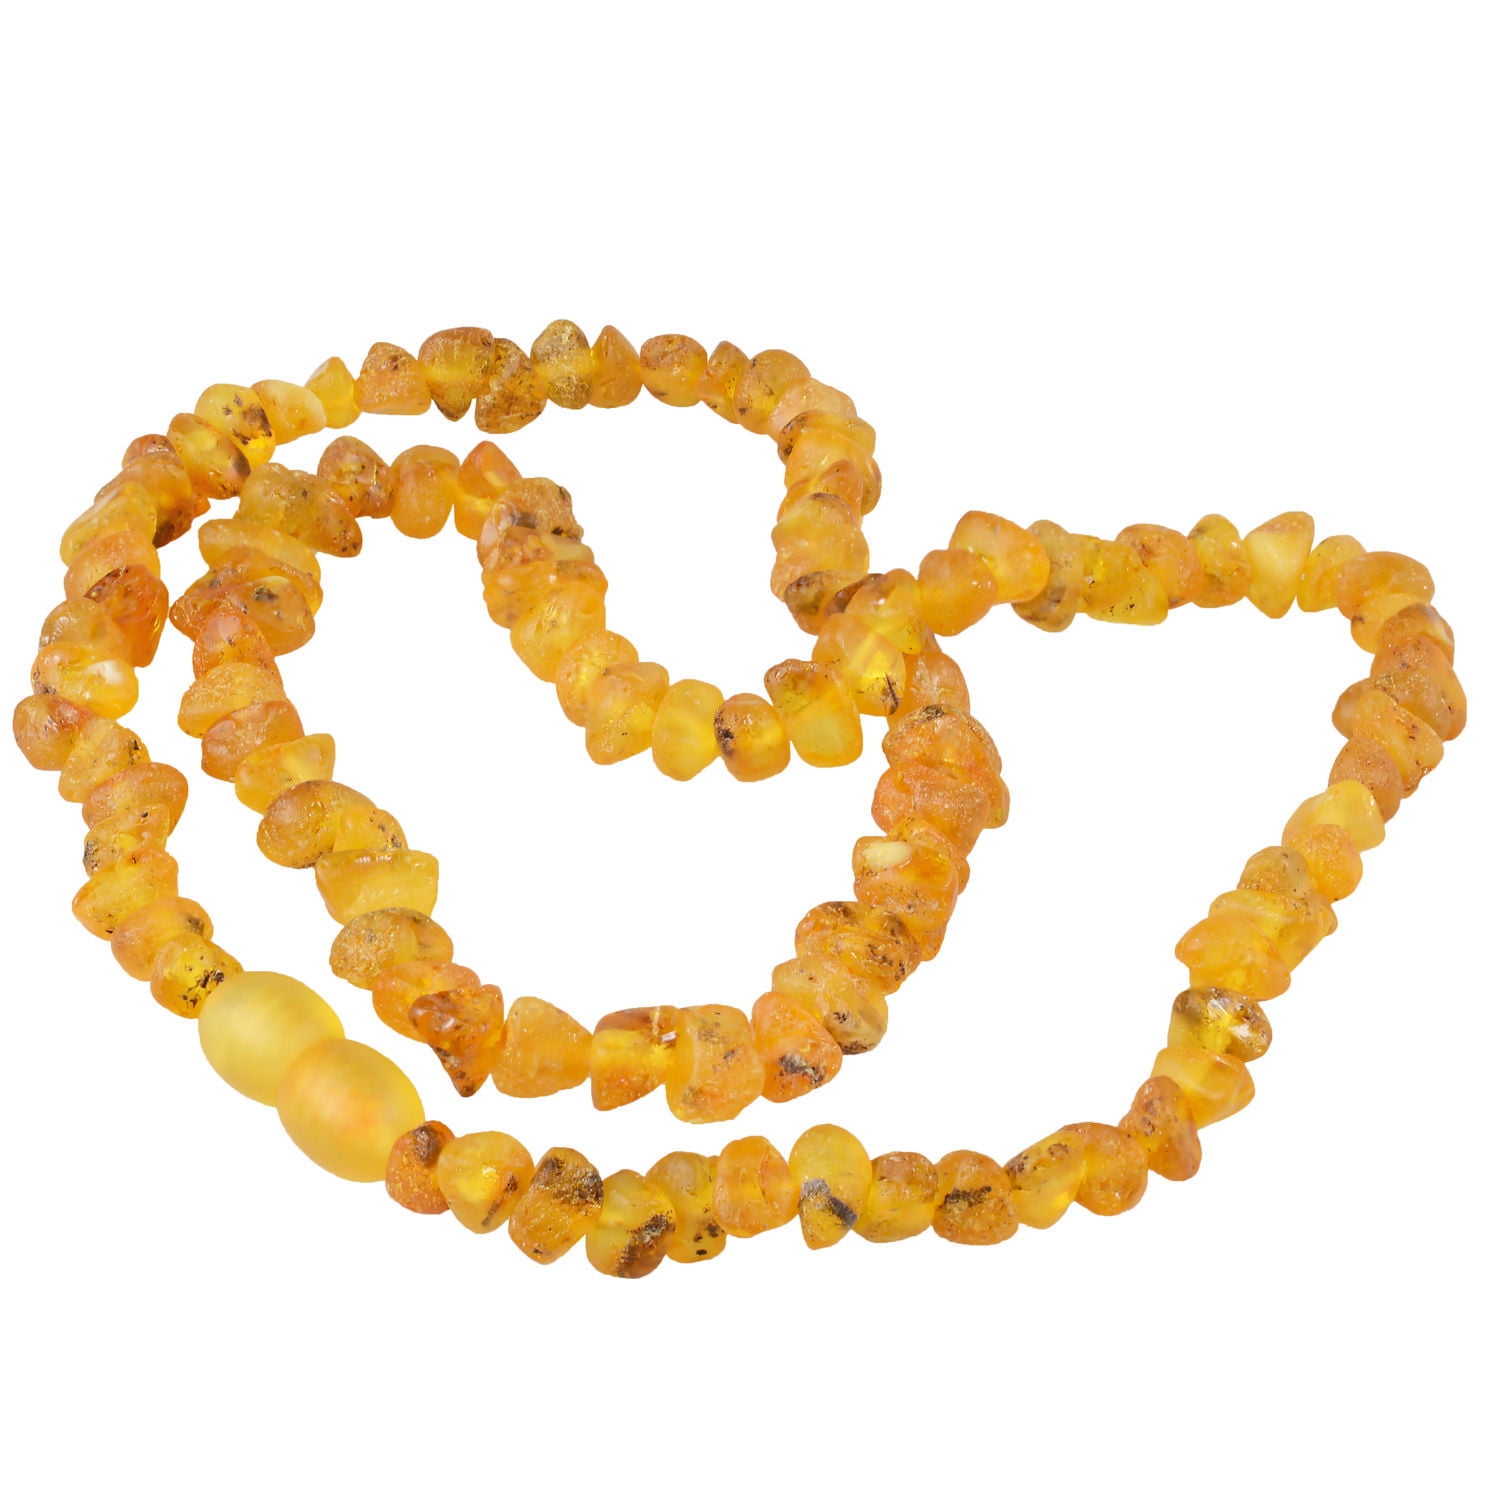 MASSIVE RAW NATURAL BALTIC AMBER NECKLACE 20,07 inch 